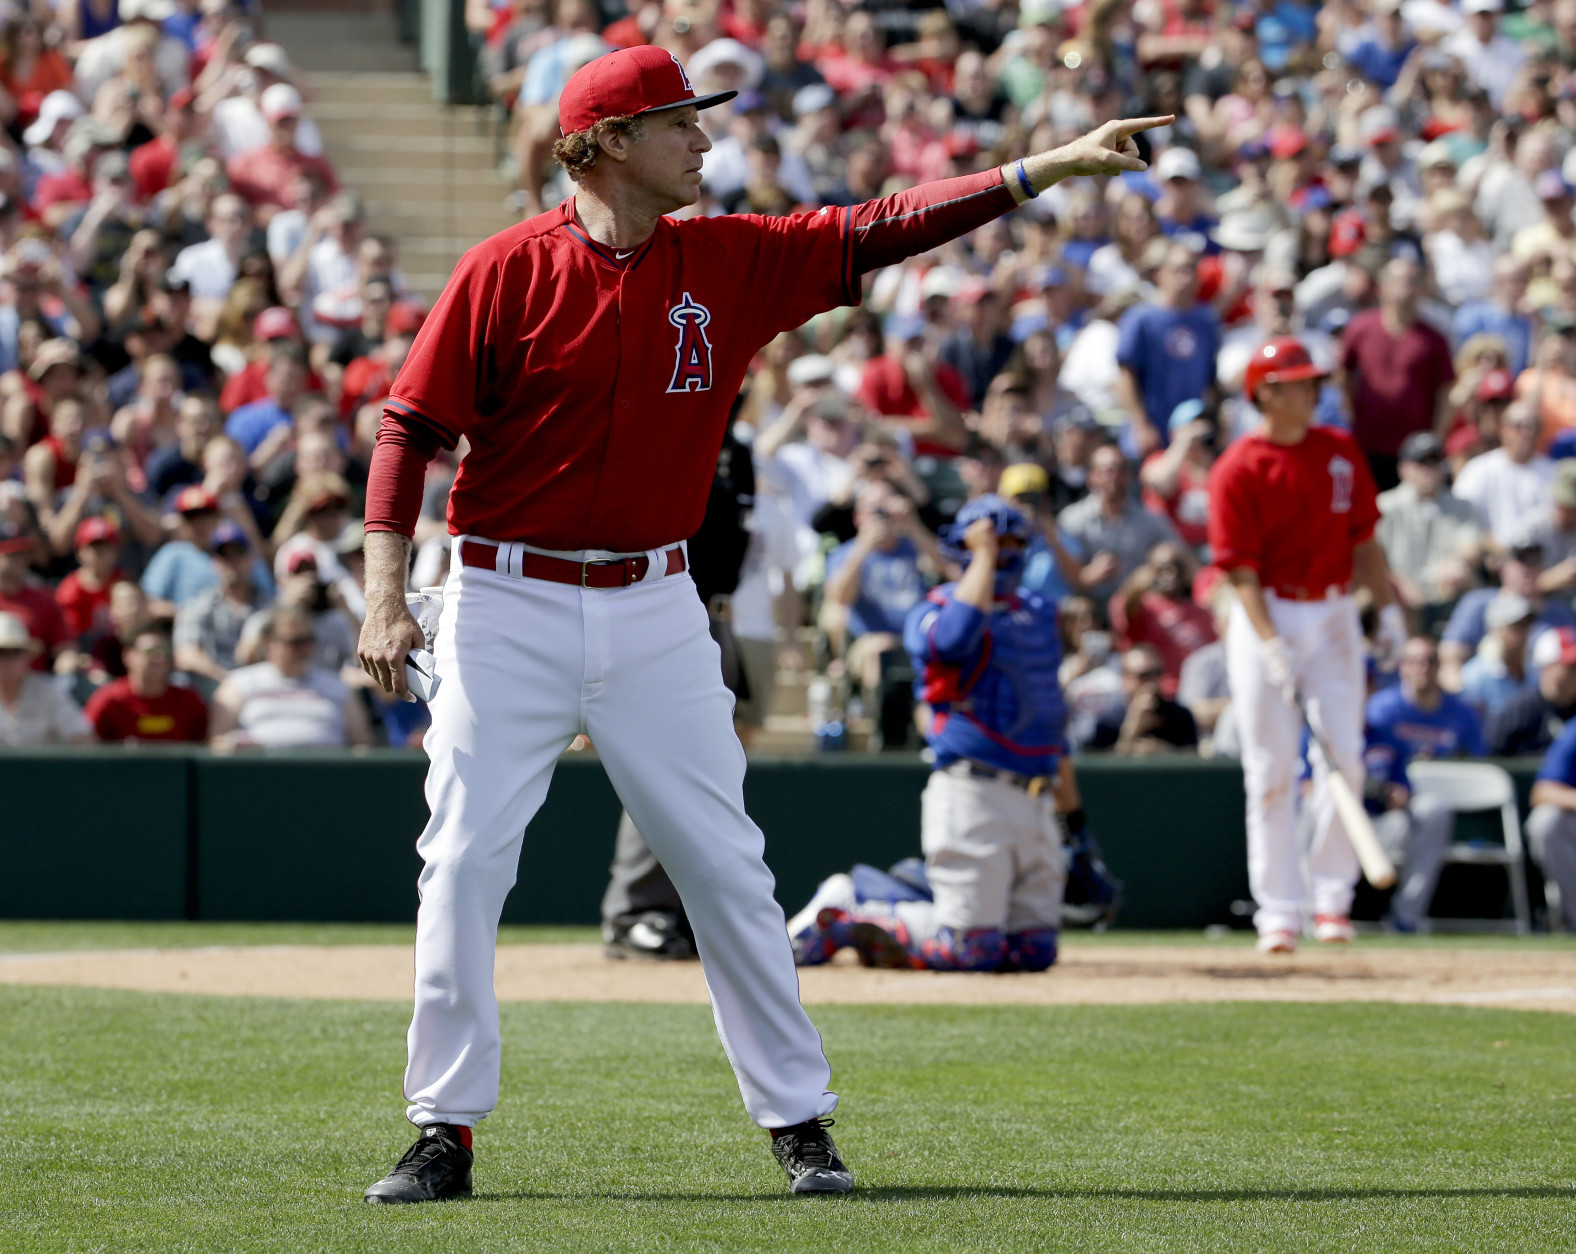 Actor Will Ferrell dressed as a Los Angeles Angels player yells to ball players during a spring training baseball exhibition game against the Chicago Cubs in Tempe, Ariz., on Thursday, March 12, 2015. The comedian plans to play every position while making appearances at five Arizona spring training games on Thursday. (AP Photo/Chris Carlson)